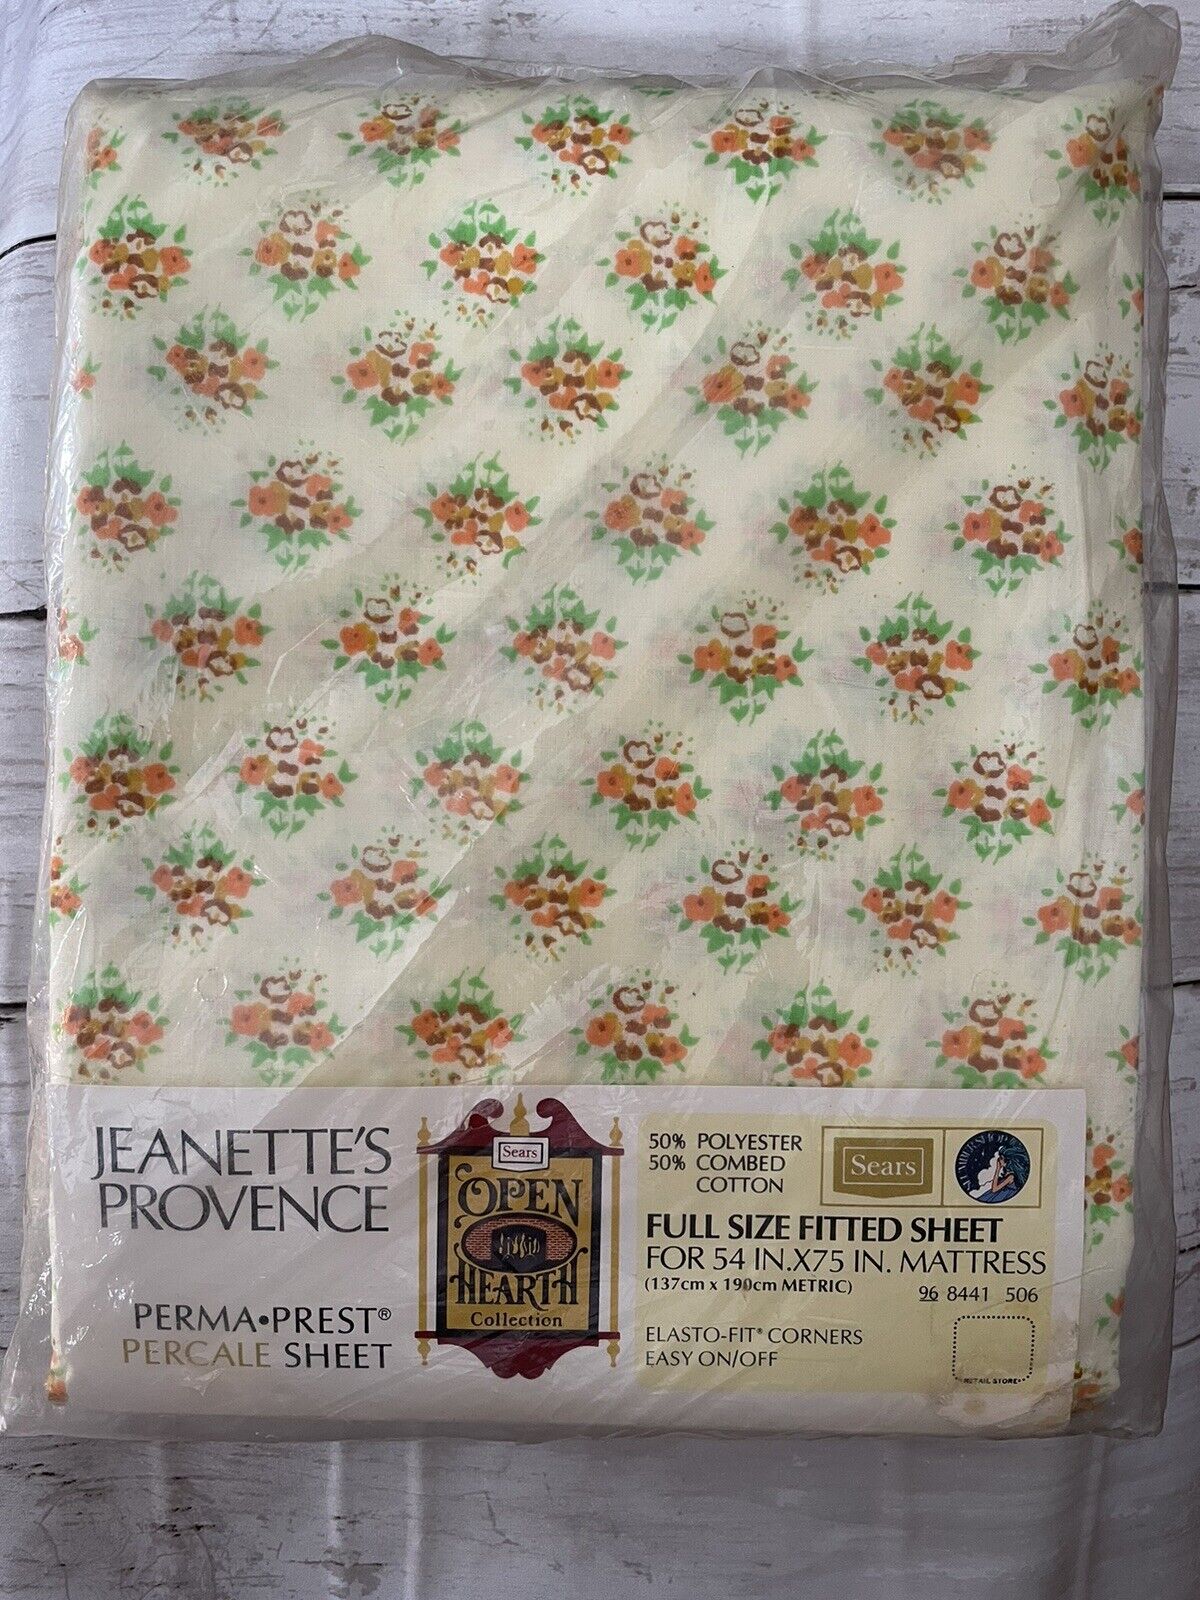 VTG Sears Open Hearth Collection Jeanette’s Provence Full Fitted sheet NEW